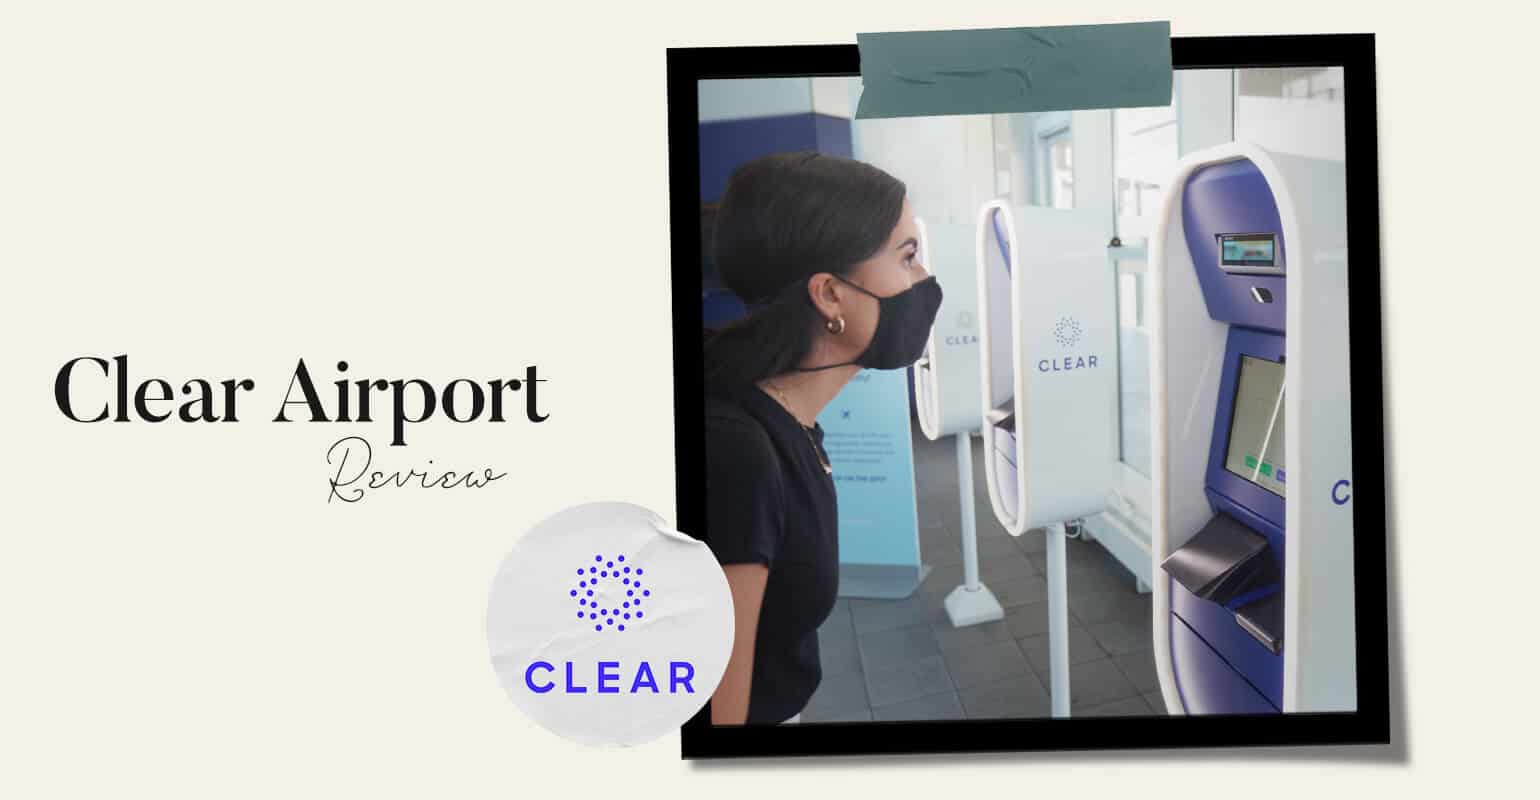 Get in the CLEAR: A Touchless Airport Experience Review